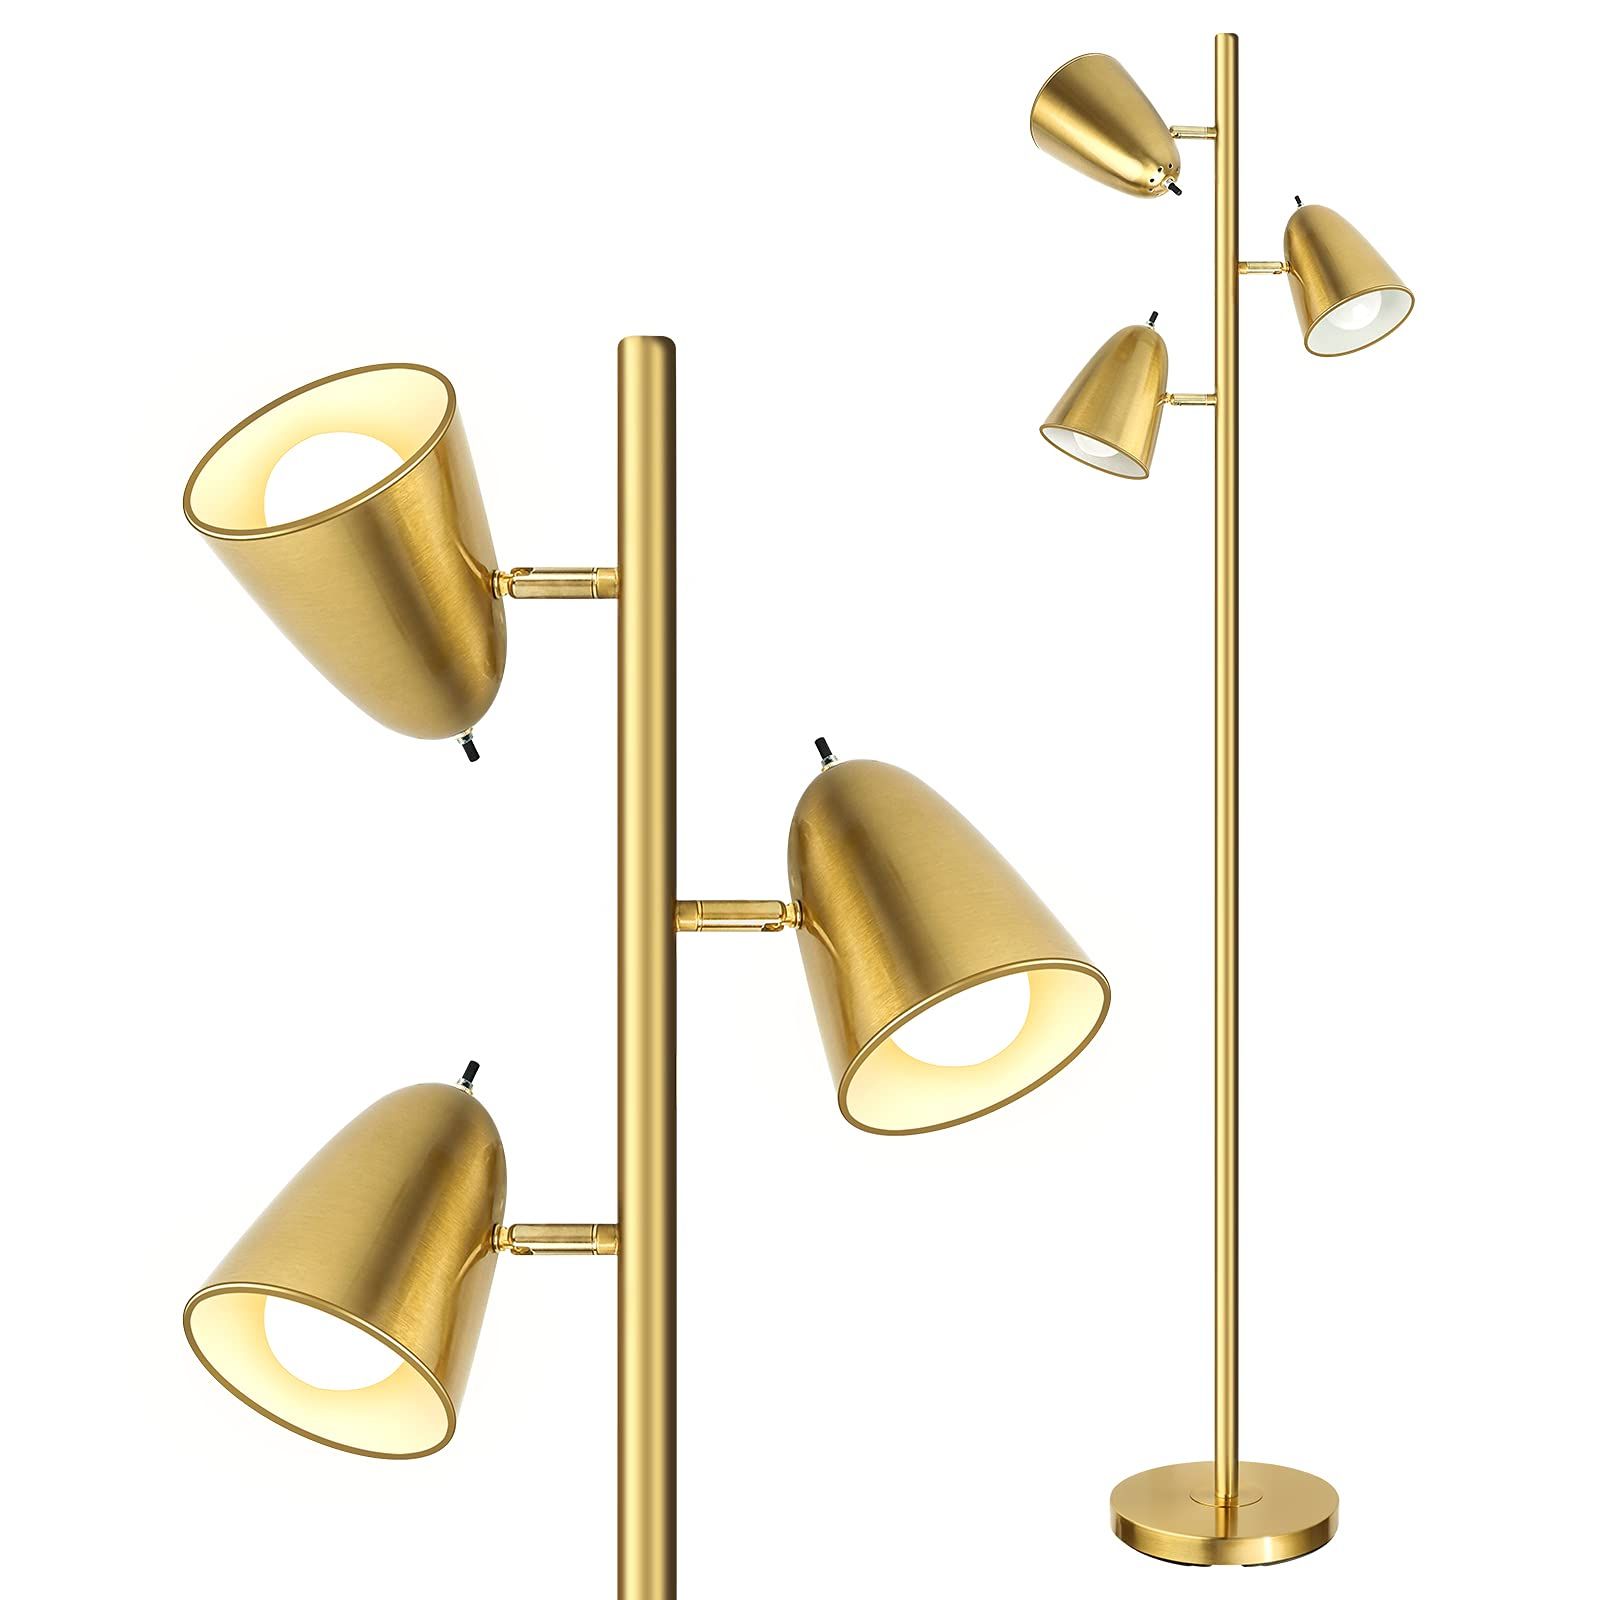 3 Light Tree Standing Lamps Intended For Best And Newest Qimh Tree Floor Lamp With 3 Light Bulbs, Standing Tall Pole Lamps For  Living Room Bedroom Office, Reading Stand Up Lamps With 3 Adjustable Arms,  Brushed Gold – – Amazon (View 6 of 15)